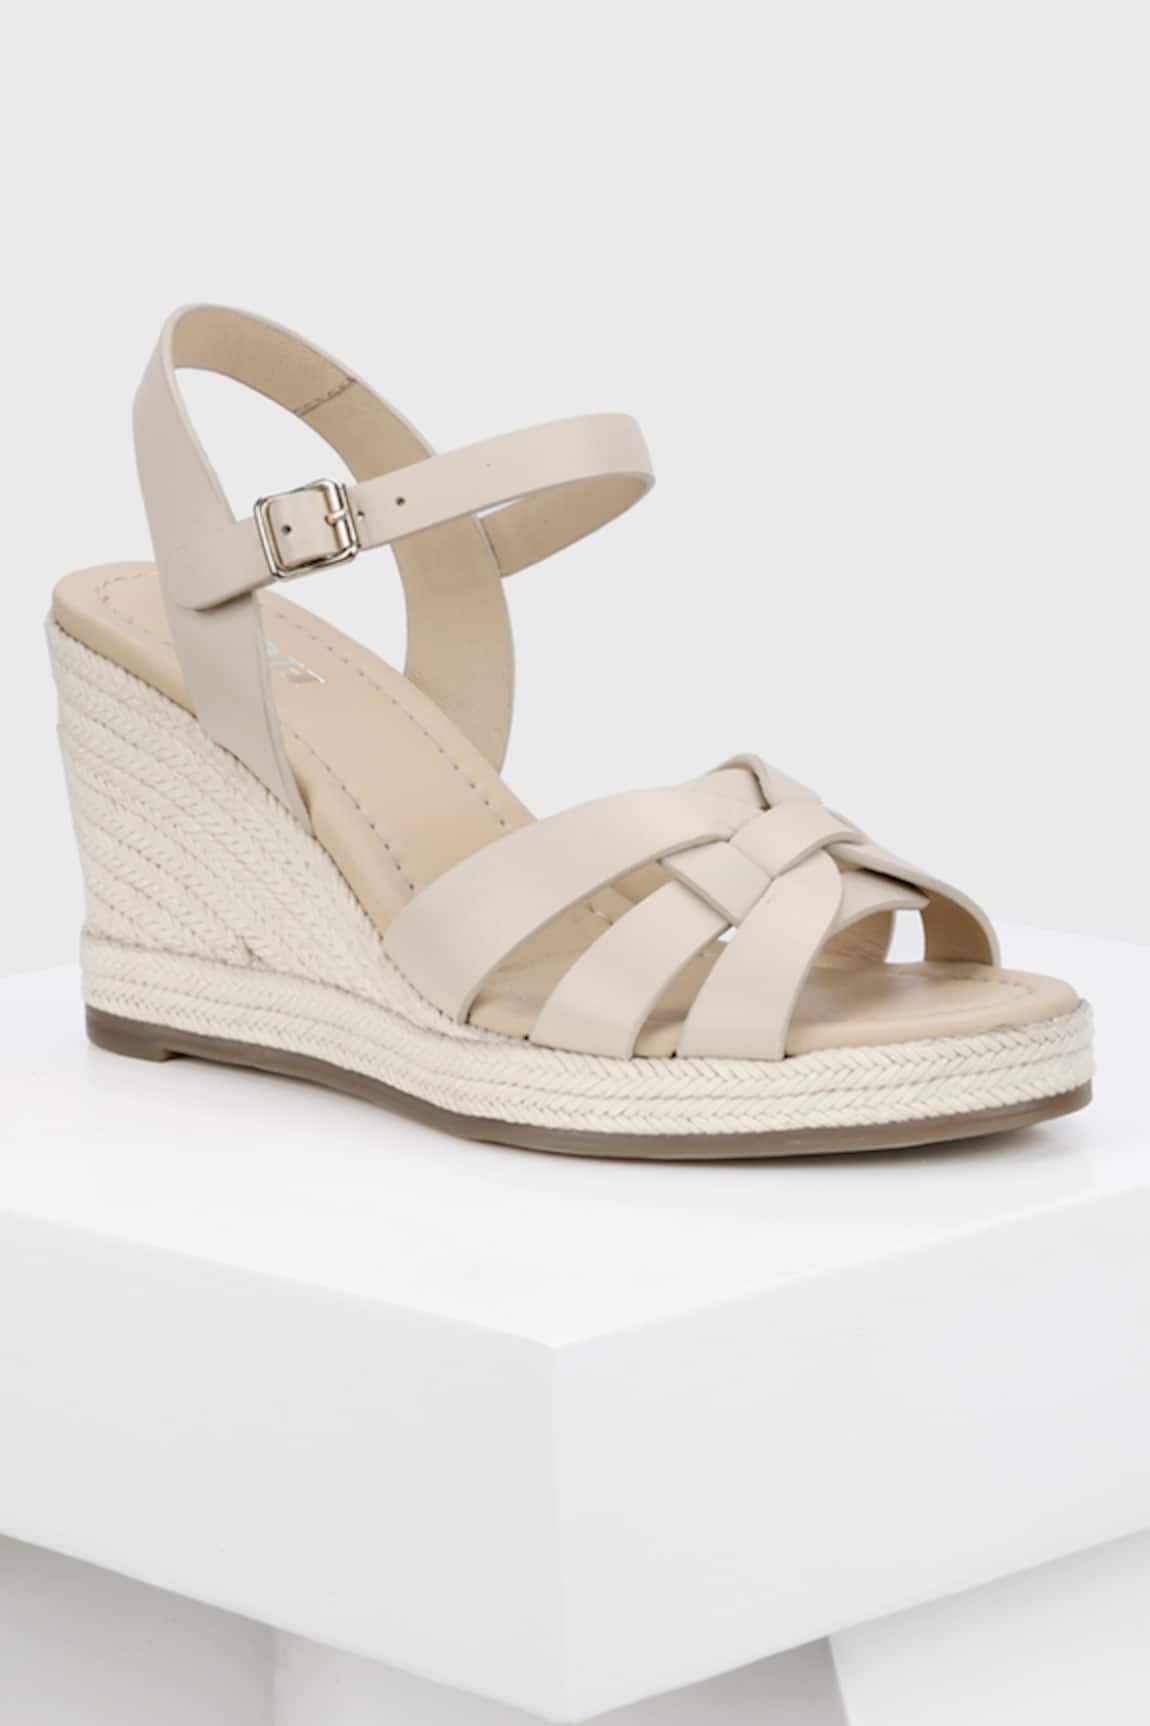 OROH Yute Leather Criss Cross Strap Wedges